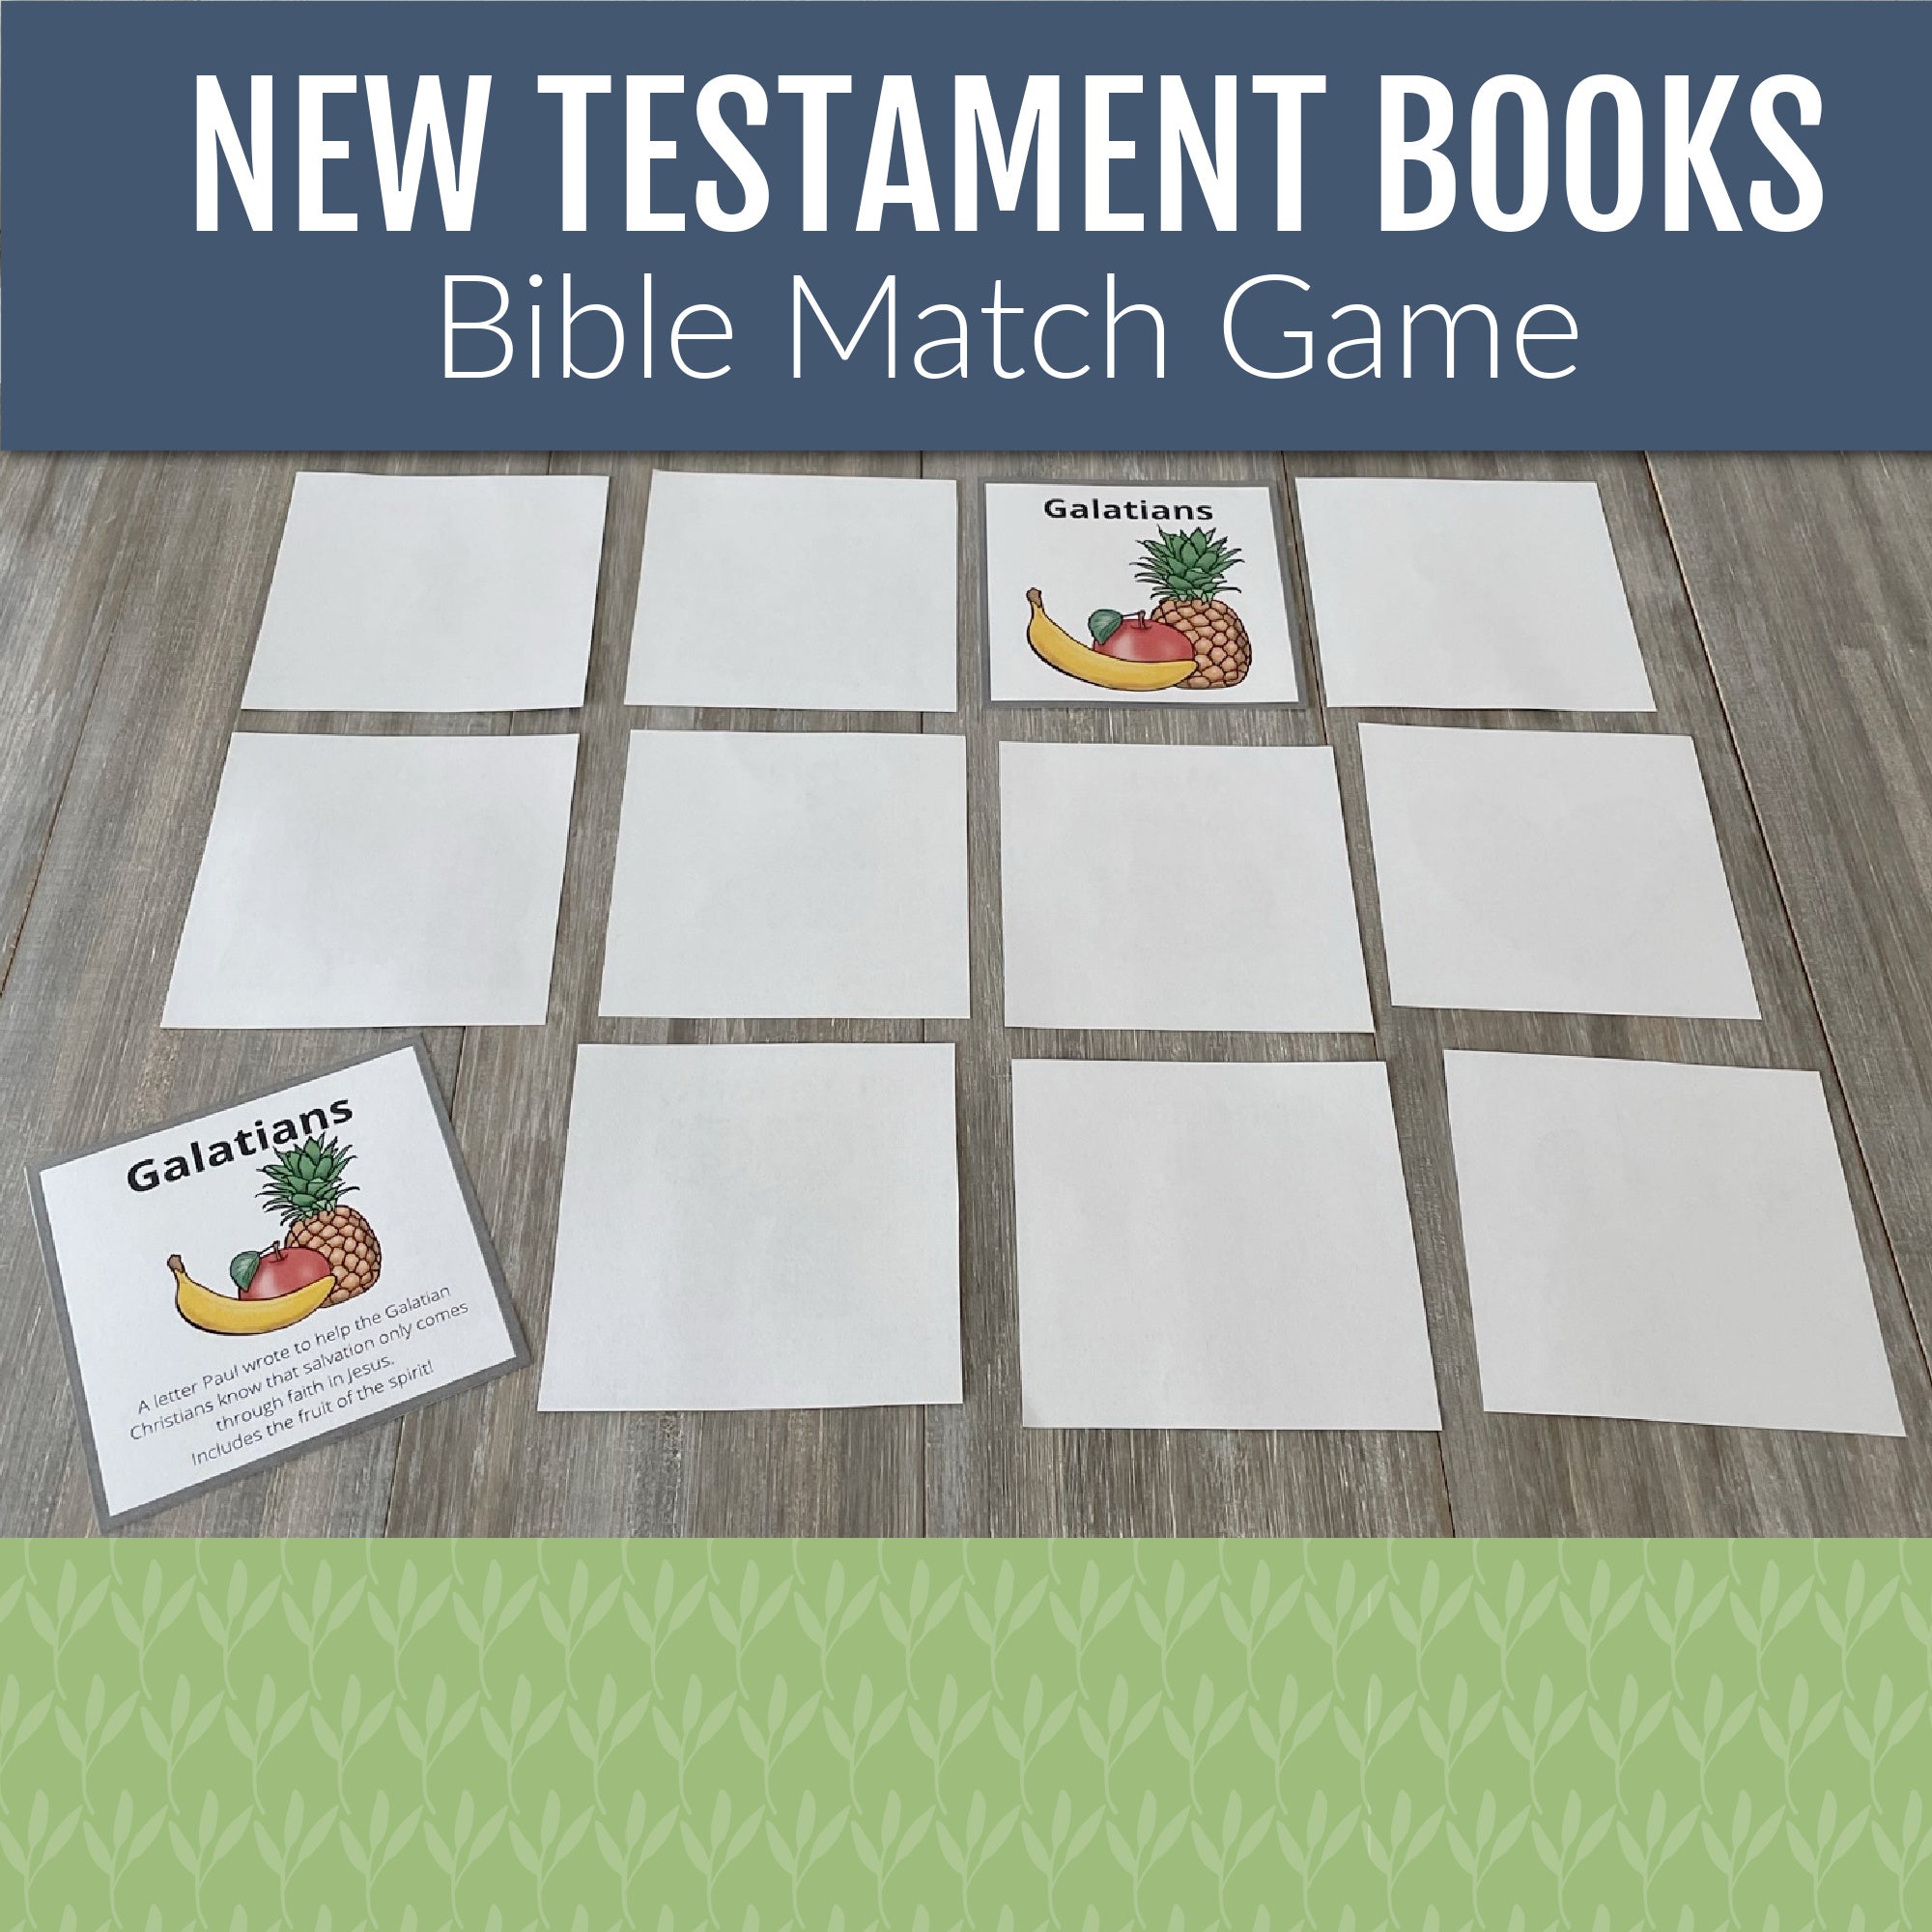 Bible Match Game - Bible Memory Game for New Testament Books of the Bi ...